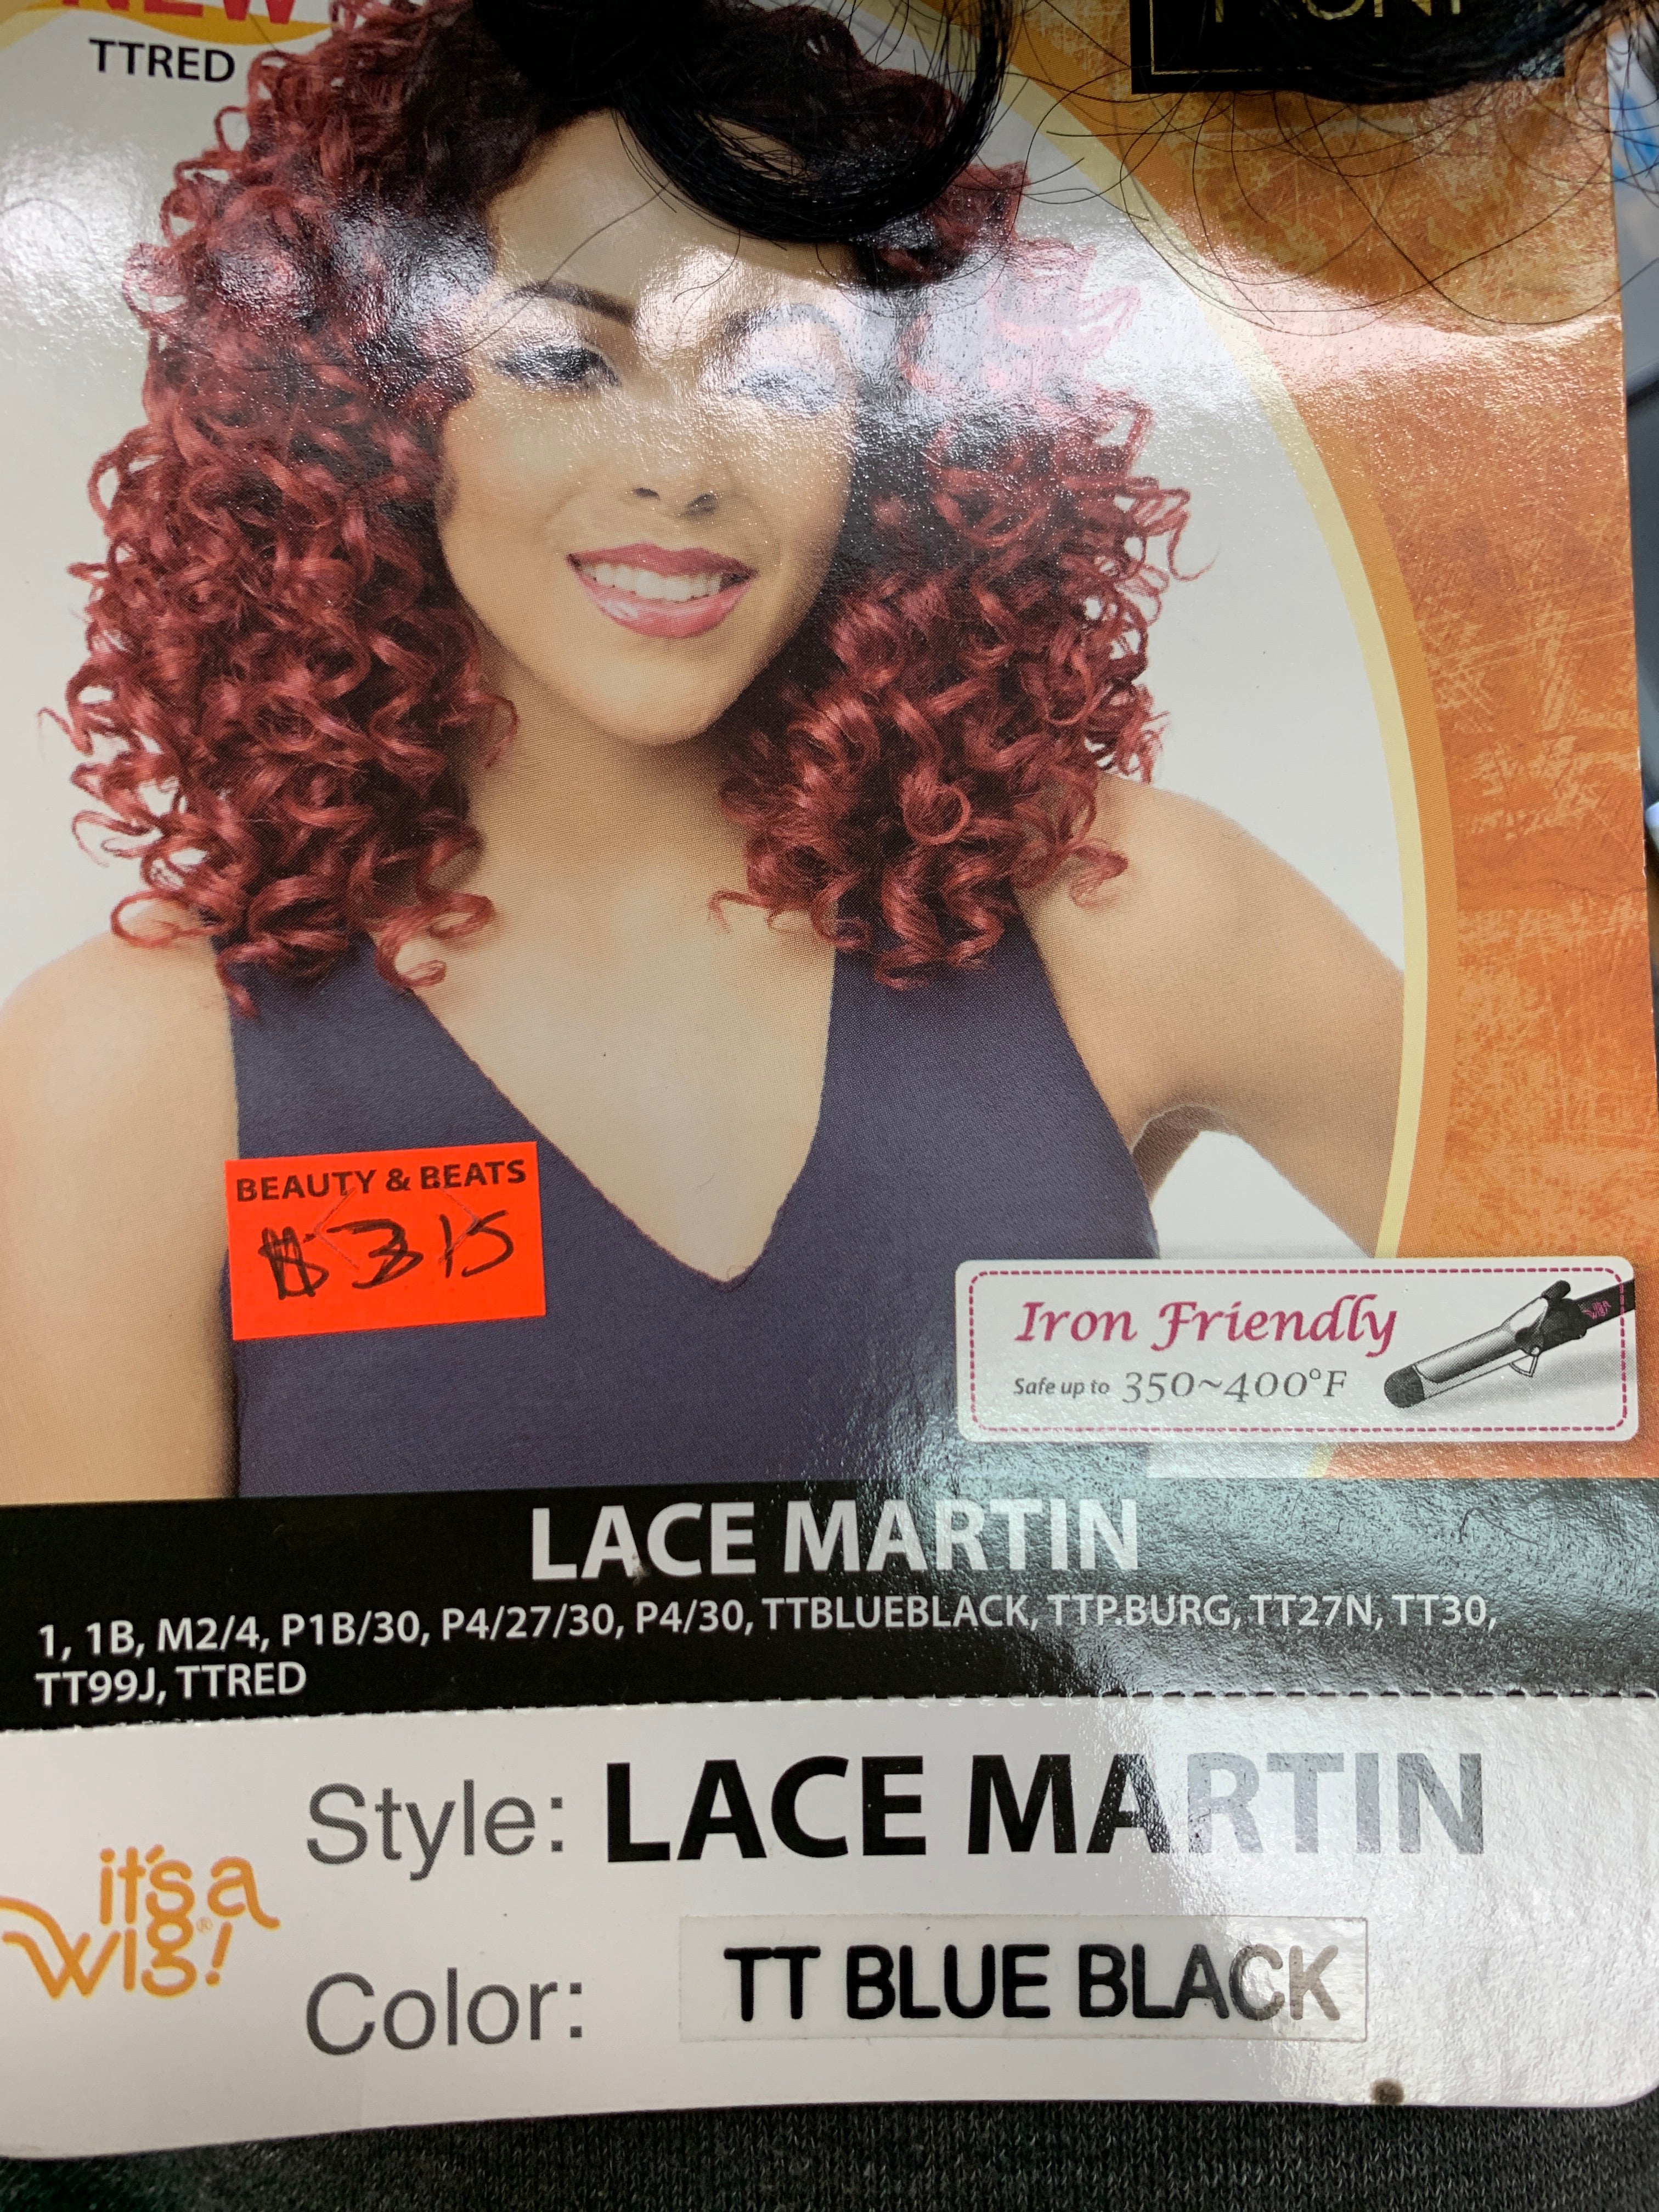 It’s a wig Lace martin